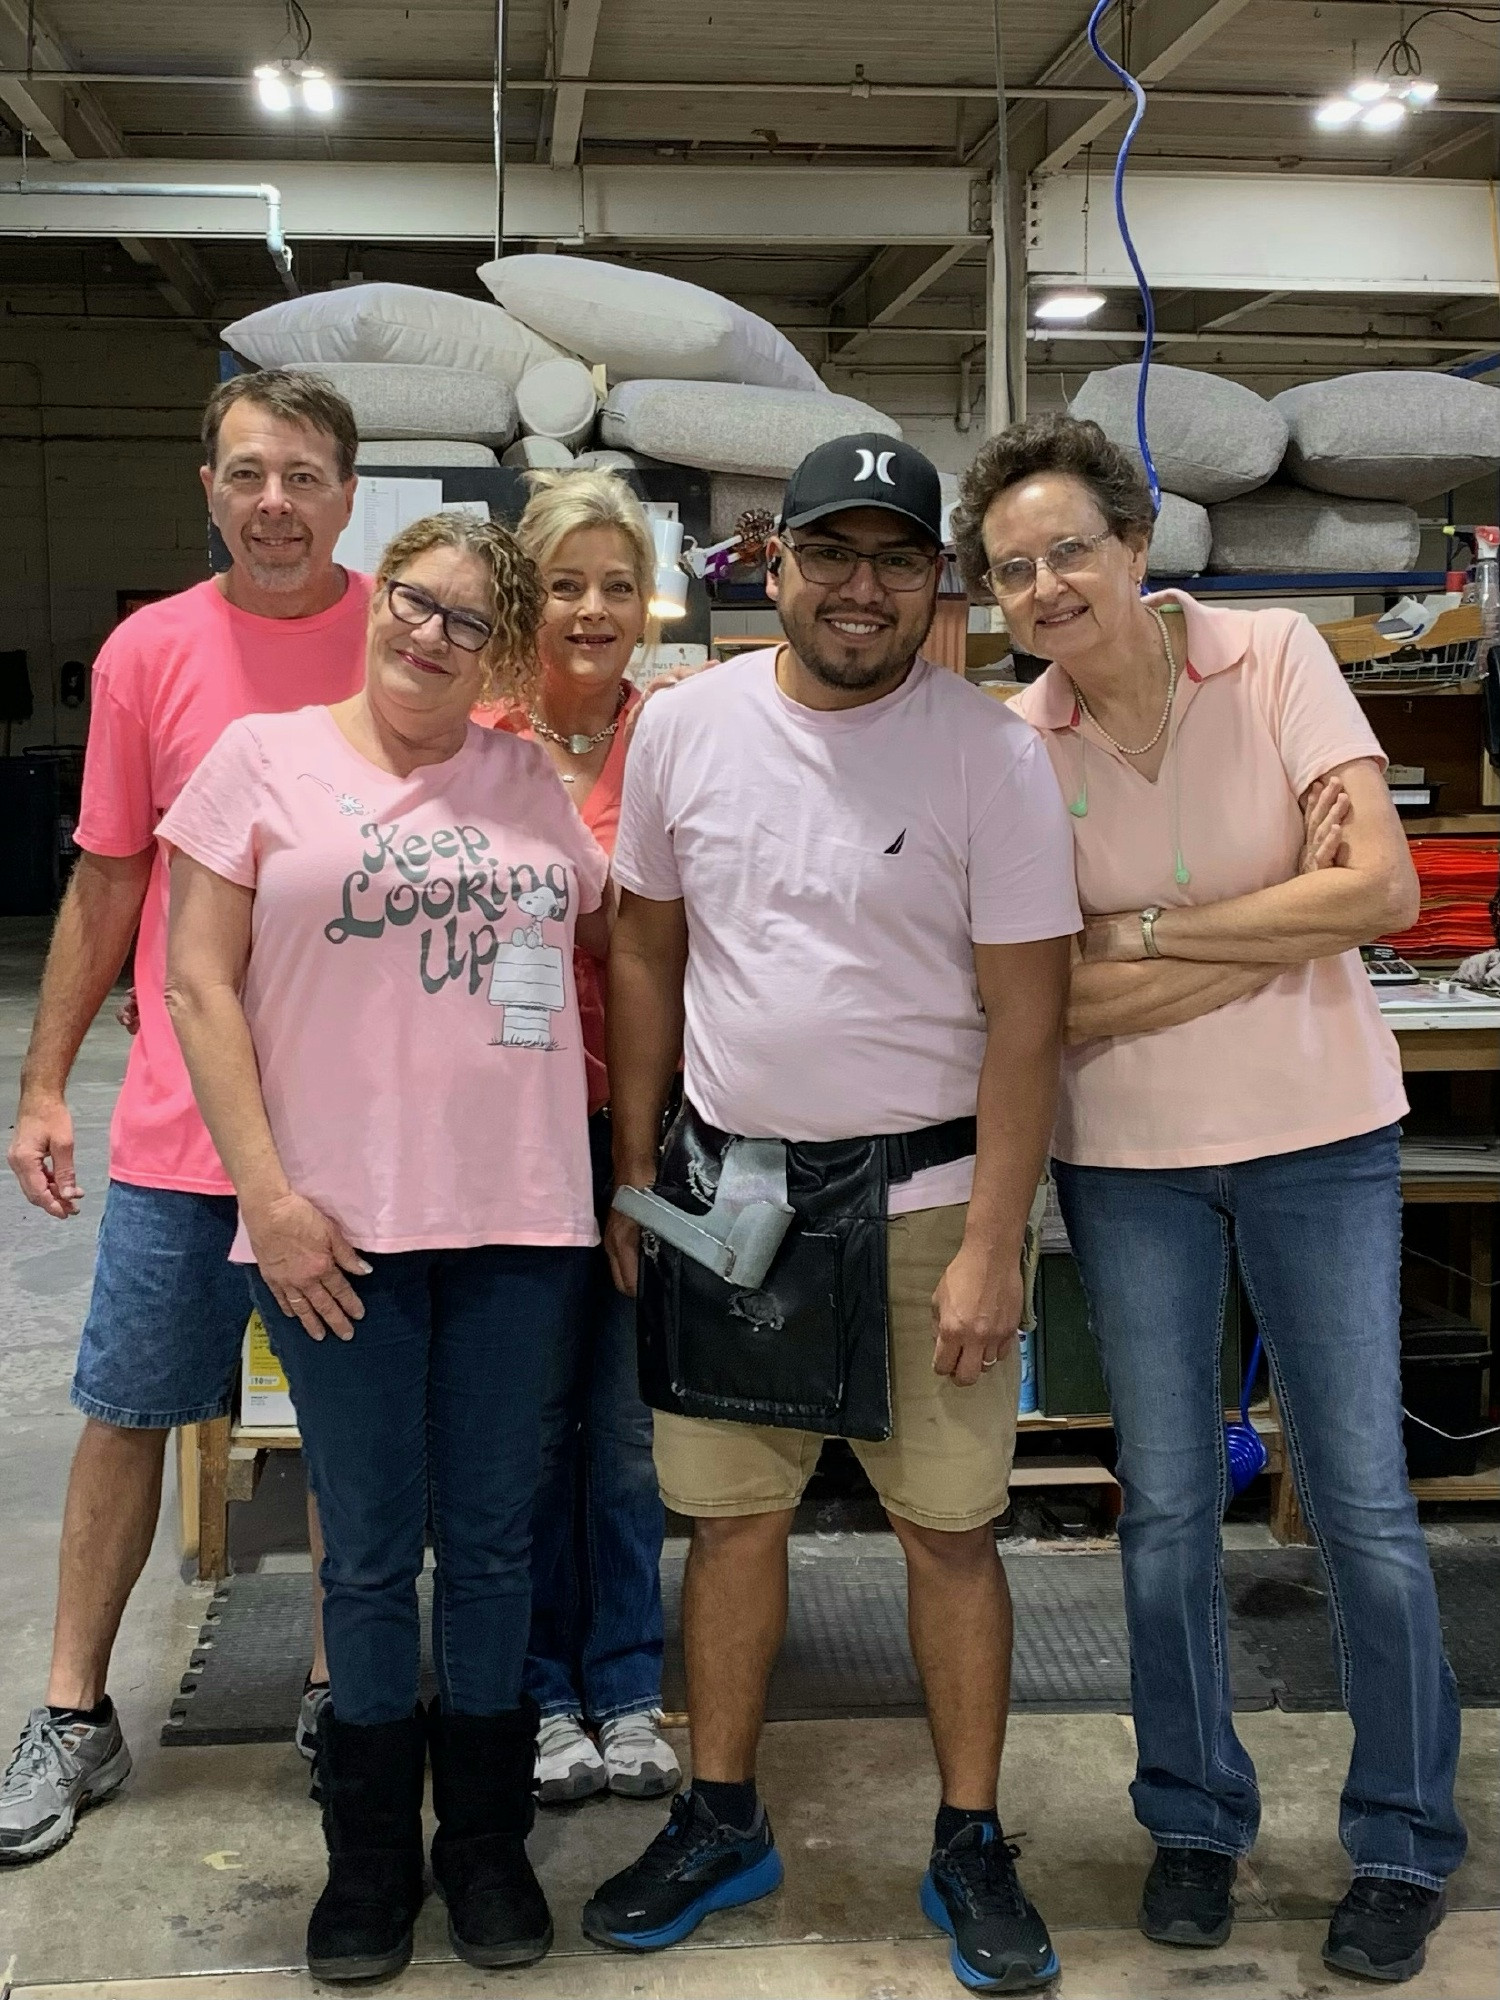 Our manufacturing employees in Thomasville, NC are proud to support Breast Cancer Awareness.
